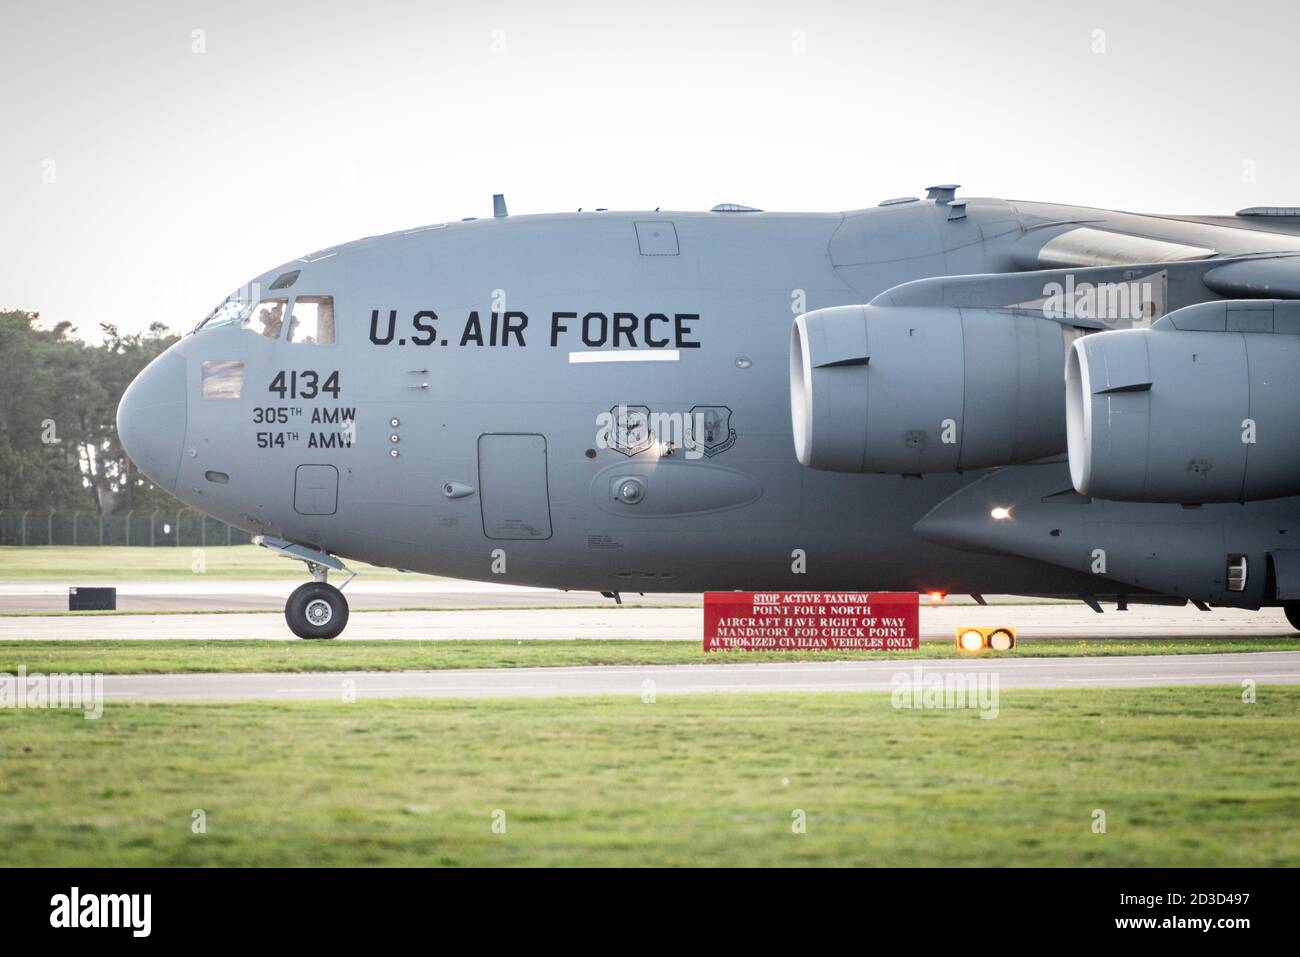 A USAF US Air Force C17 globetrotter transport plane taxiing on the runway at RAF Lakenhealth UK Stock Photo